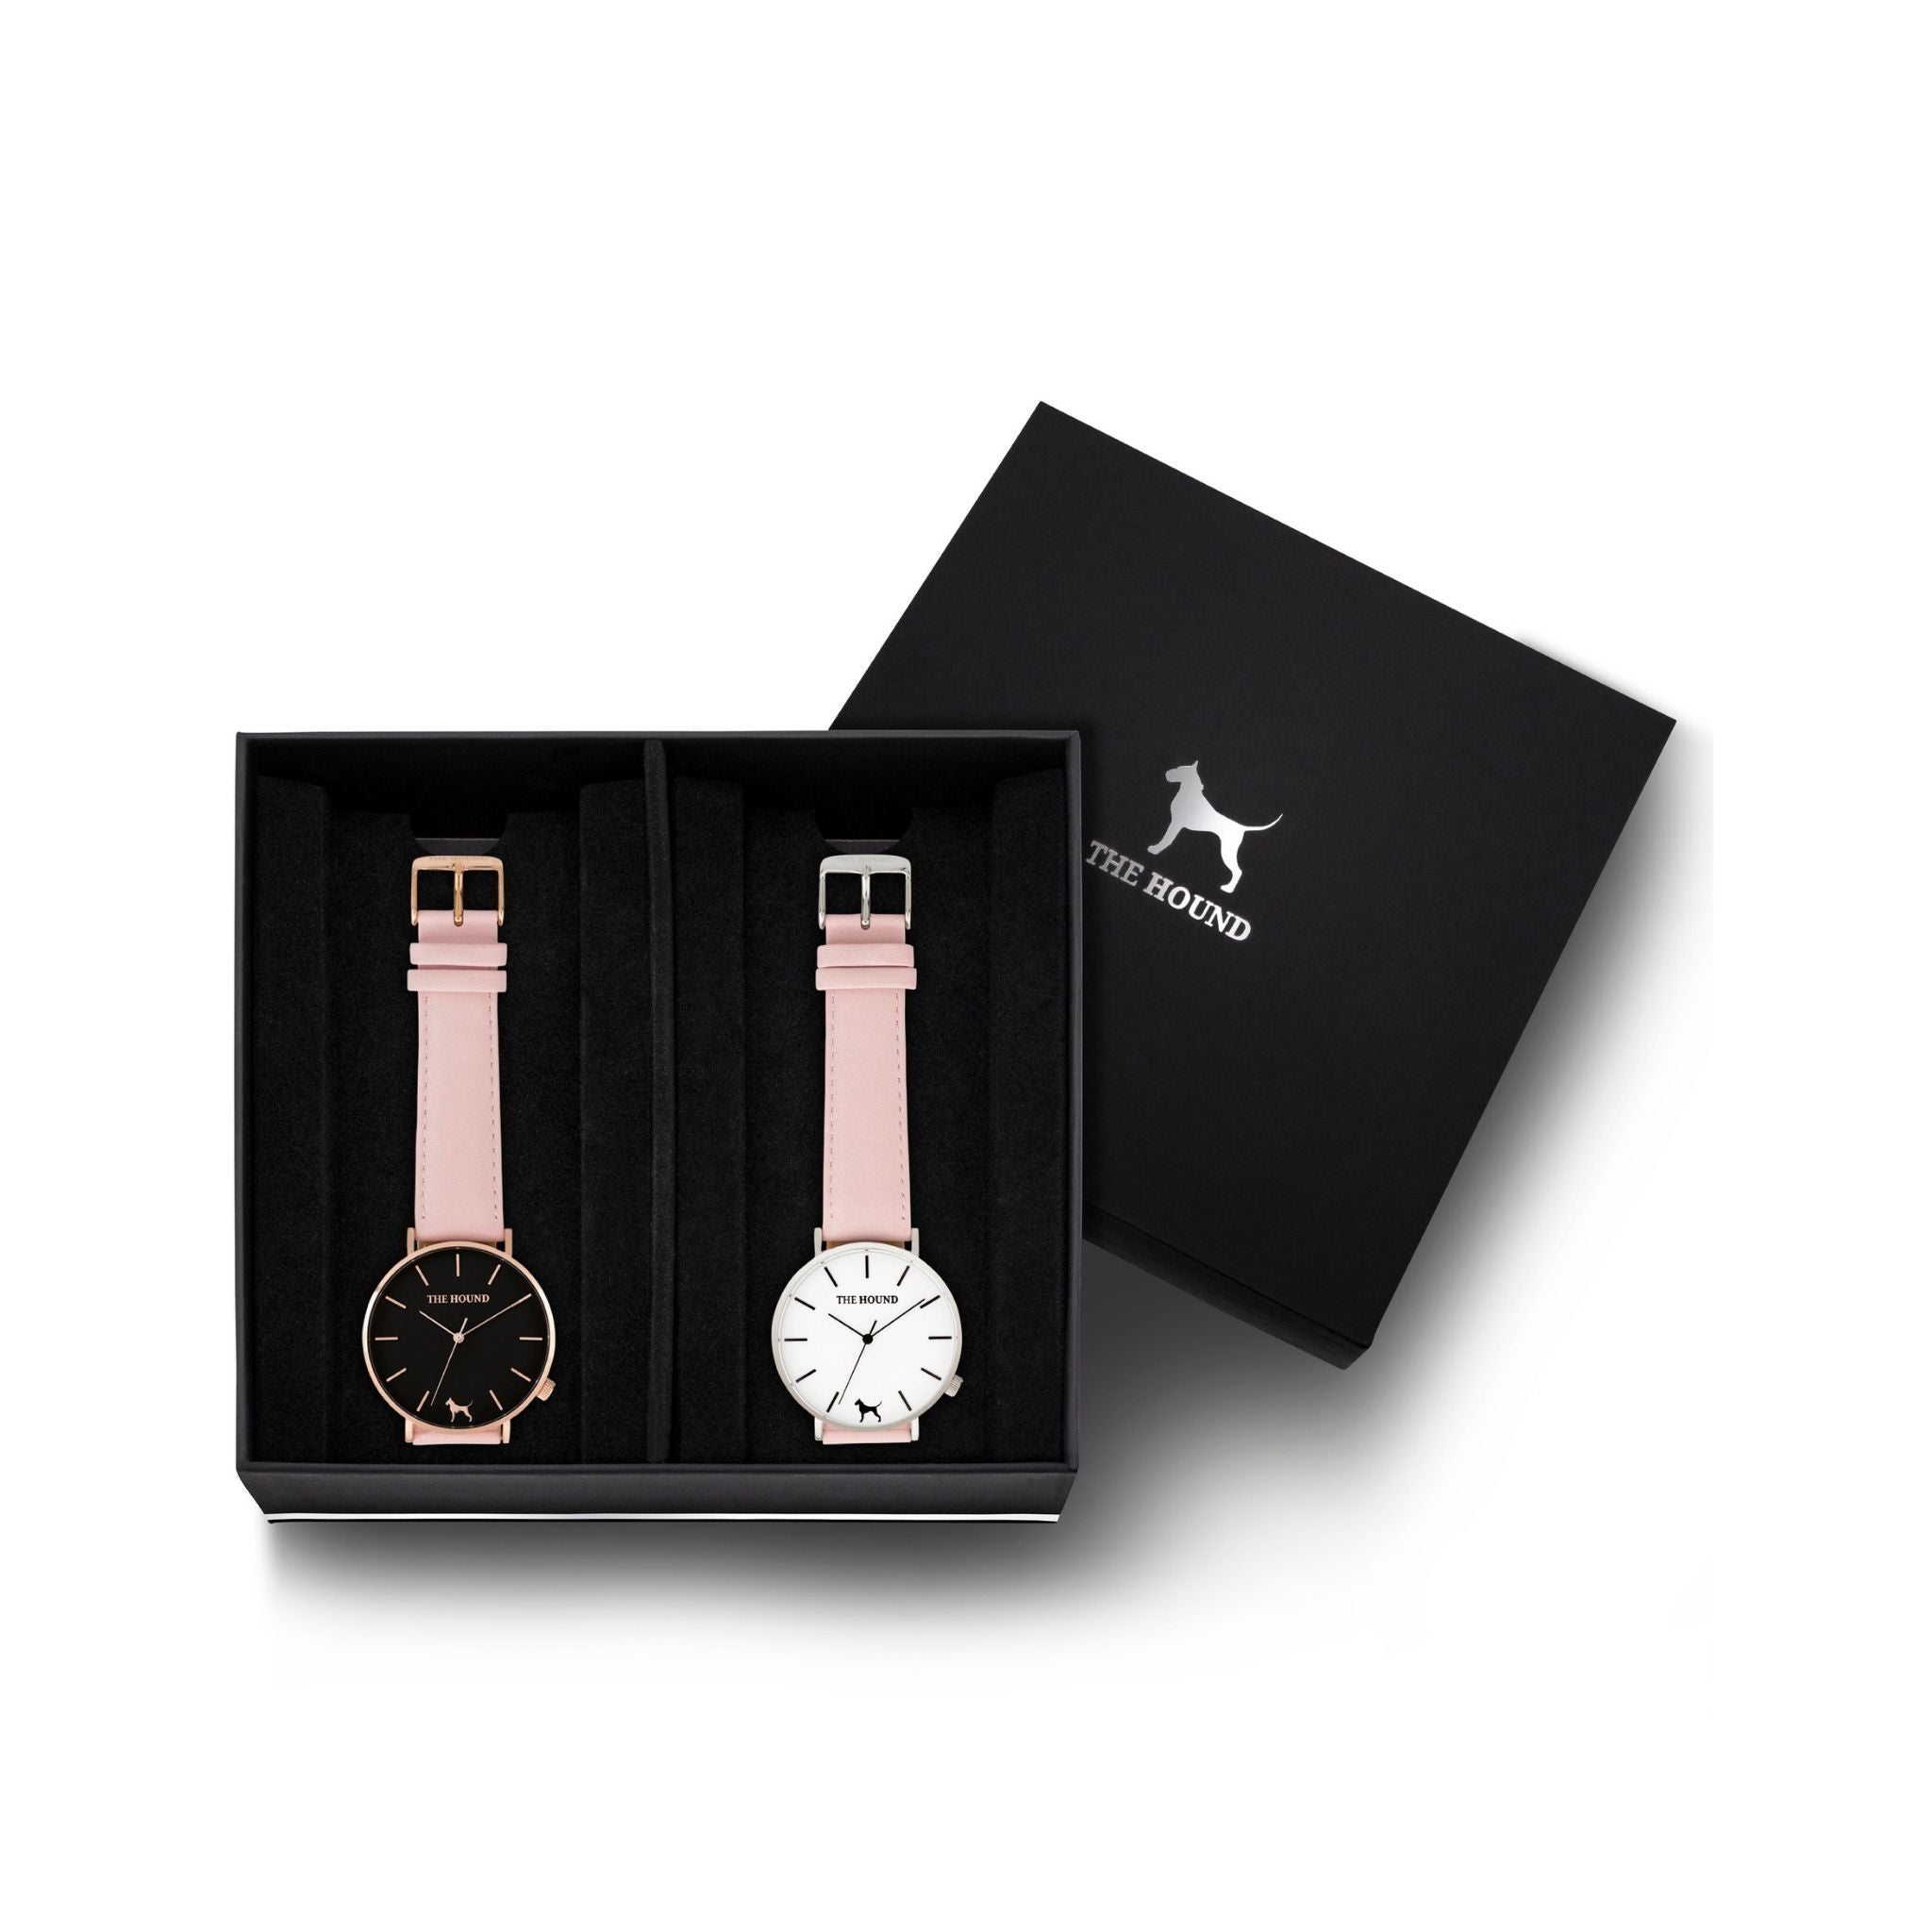 Custom gift set - Rose gold and black watch with stitched blush pink genuine leather band and a silver and white watch with stitched blush pink genuine leather band